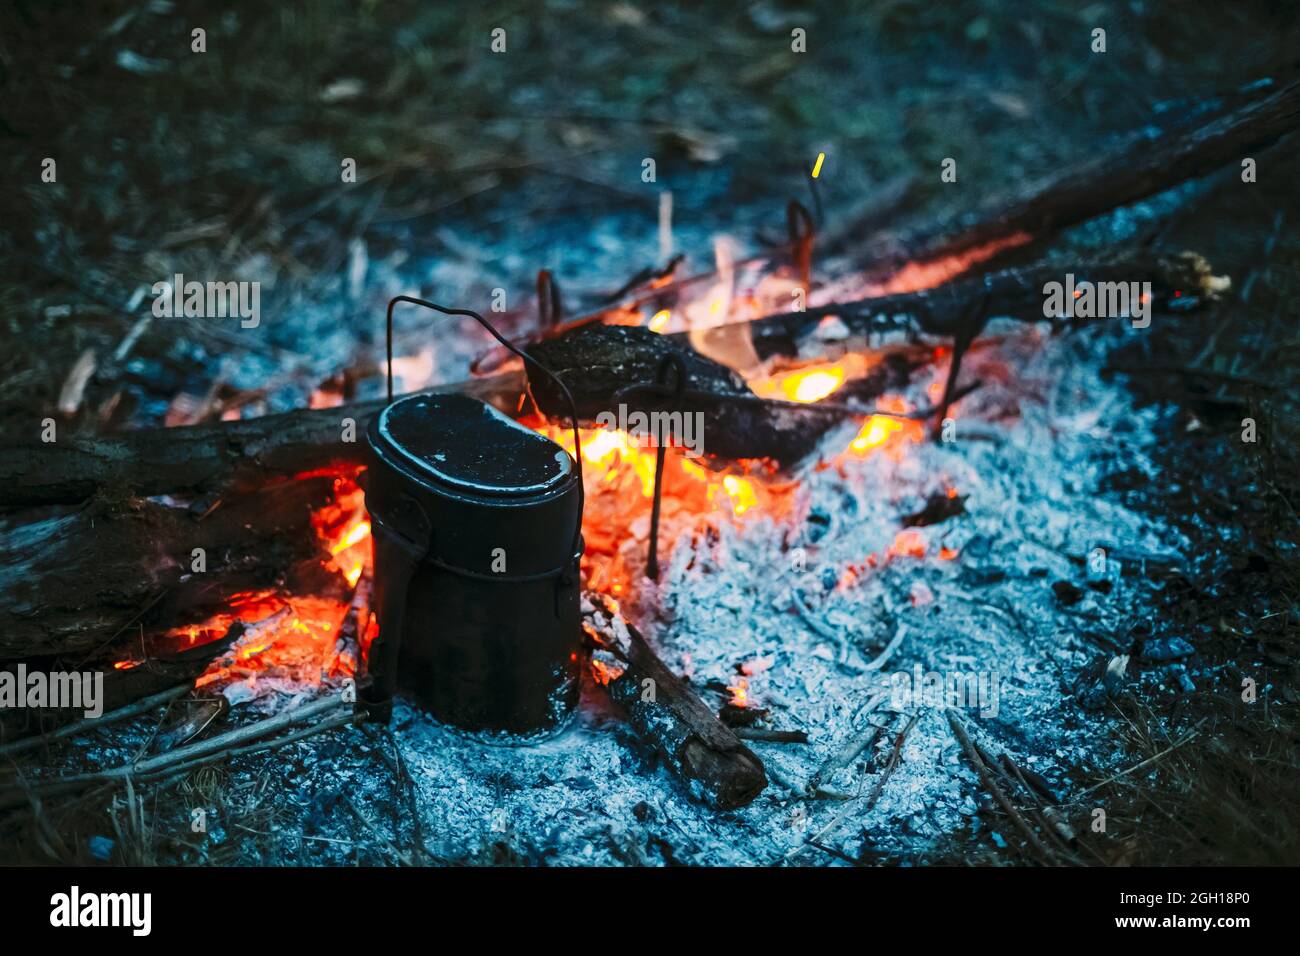 Food Is Cooked Over A Fire In An Old Vintage Retro Marching Pot Dixie. German Wehrmacht Infantry Soldier's Military Equipment Of World War II. Stock Photo